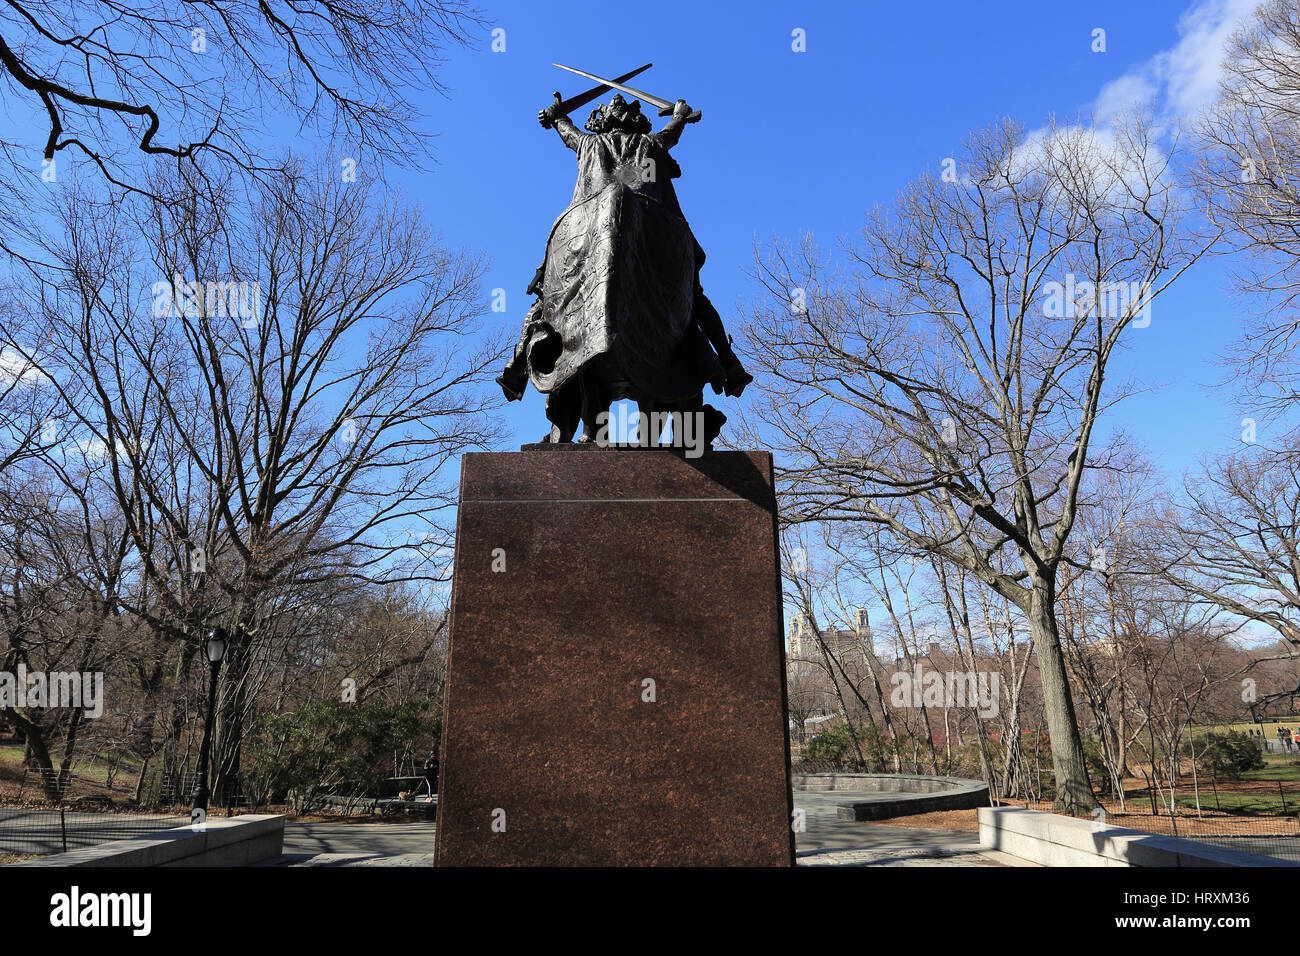 Statue of King Wladyslaw Jagiello of Poland Central Park New York City Stock Photo